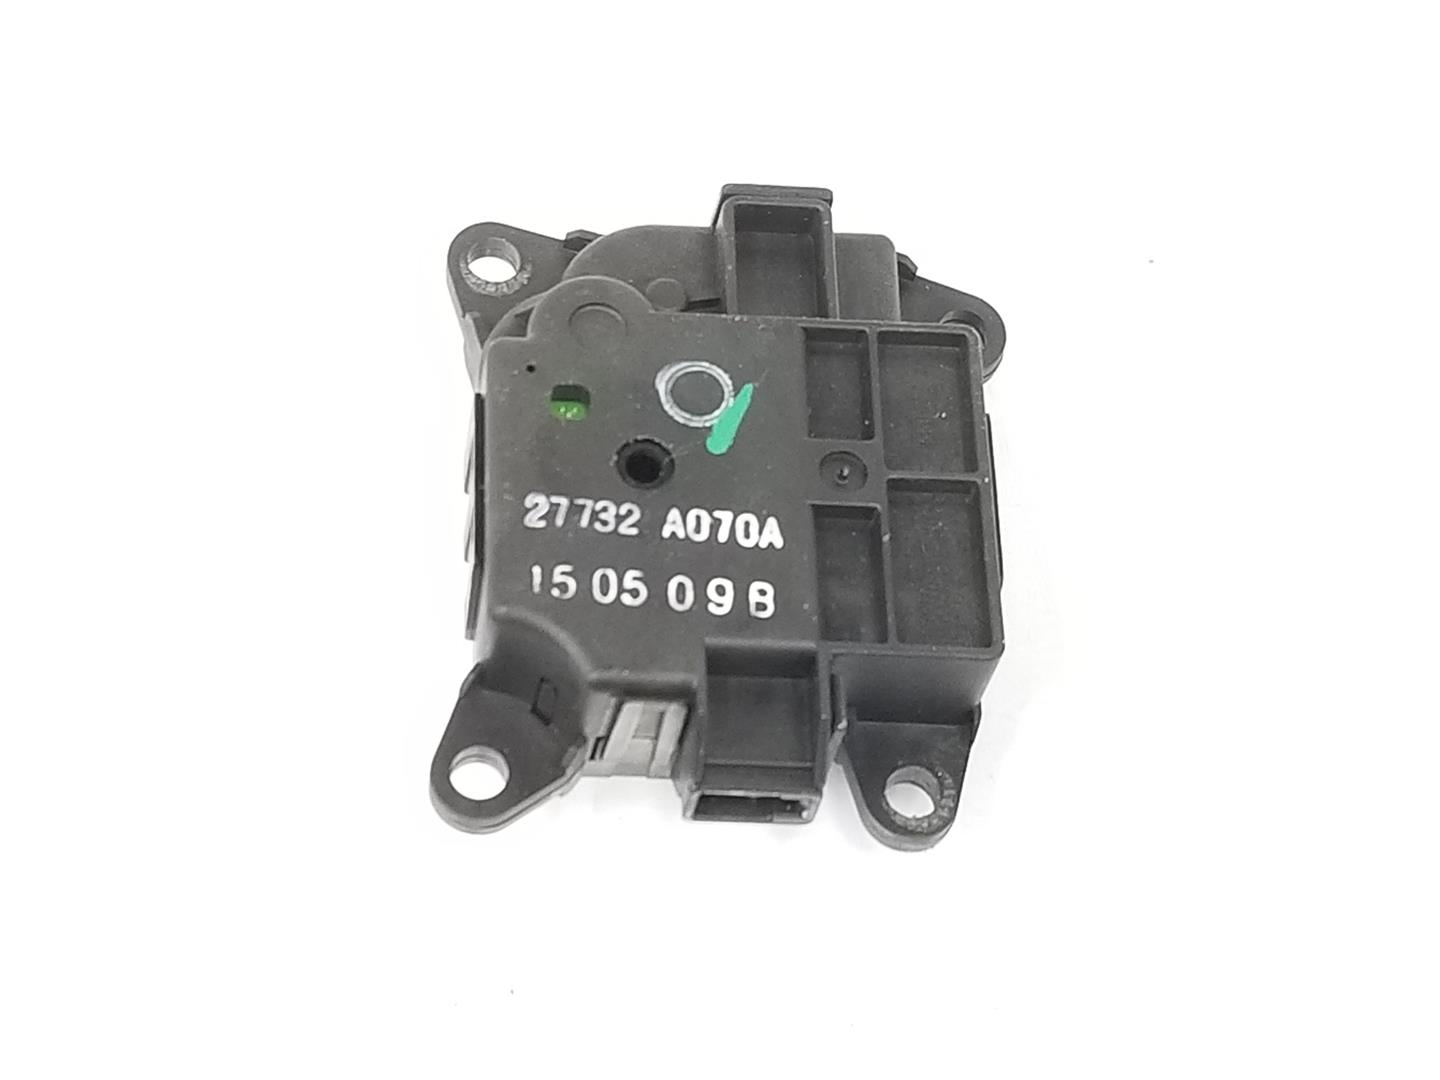 NISSAN NP300 1 generation (2008-2015) Air Conditioner Air Flow Valve Motor 27732A070A, 27732A070A 24188926